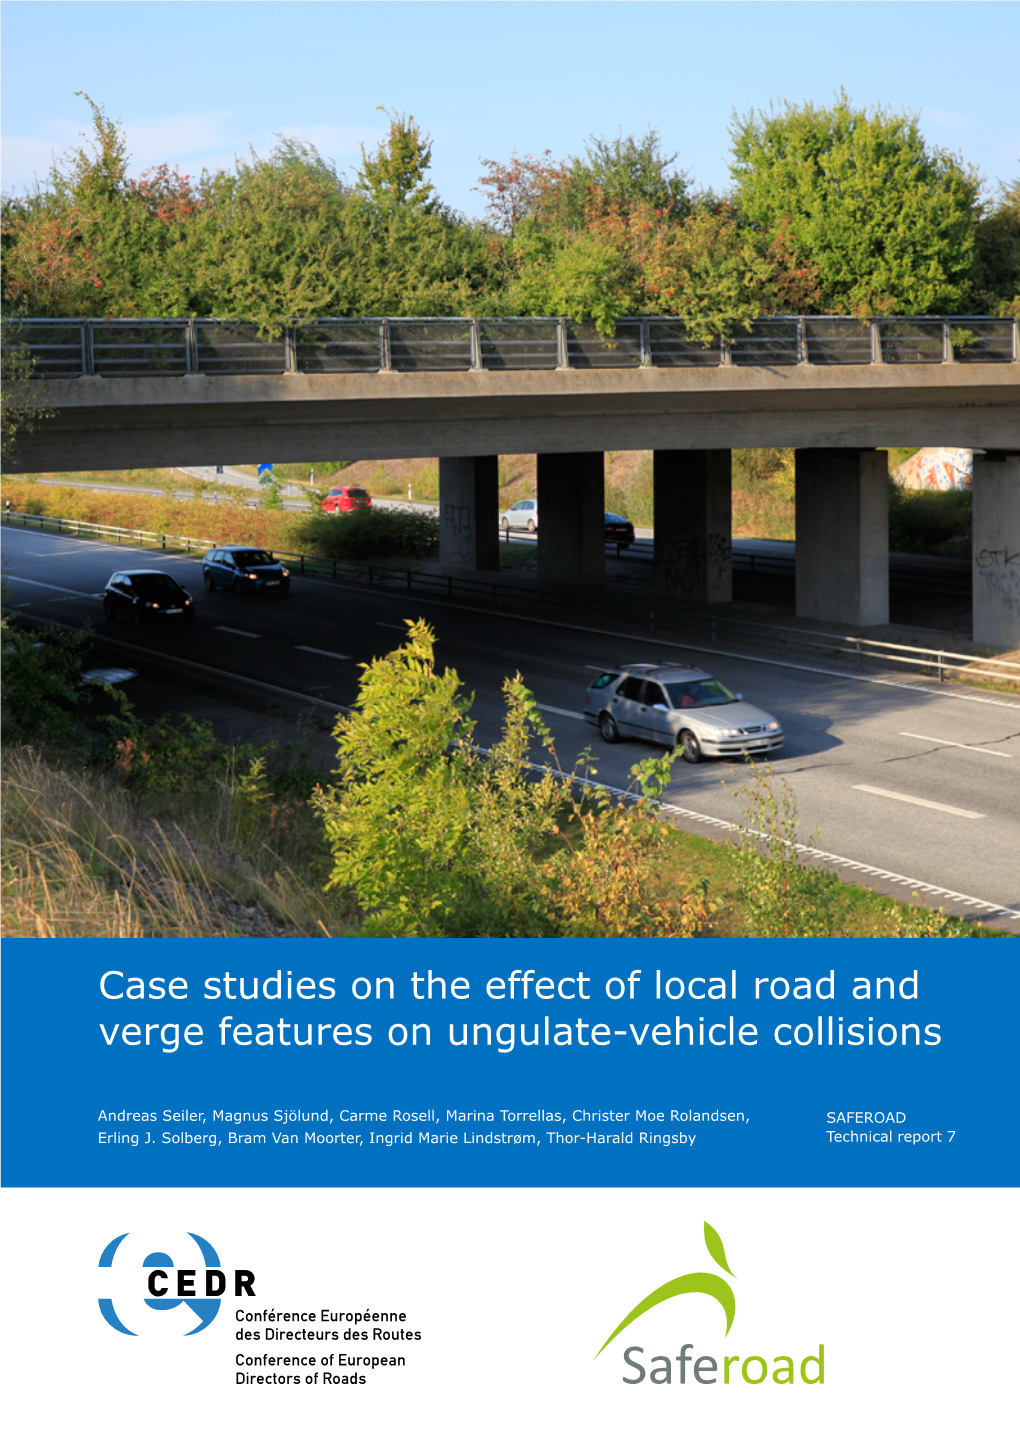 Case Studies on the Effect of Local Road and Verge Features on Ungulate-Vehicle Collisions